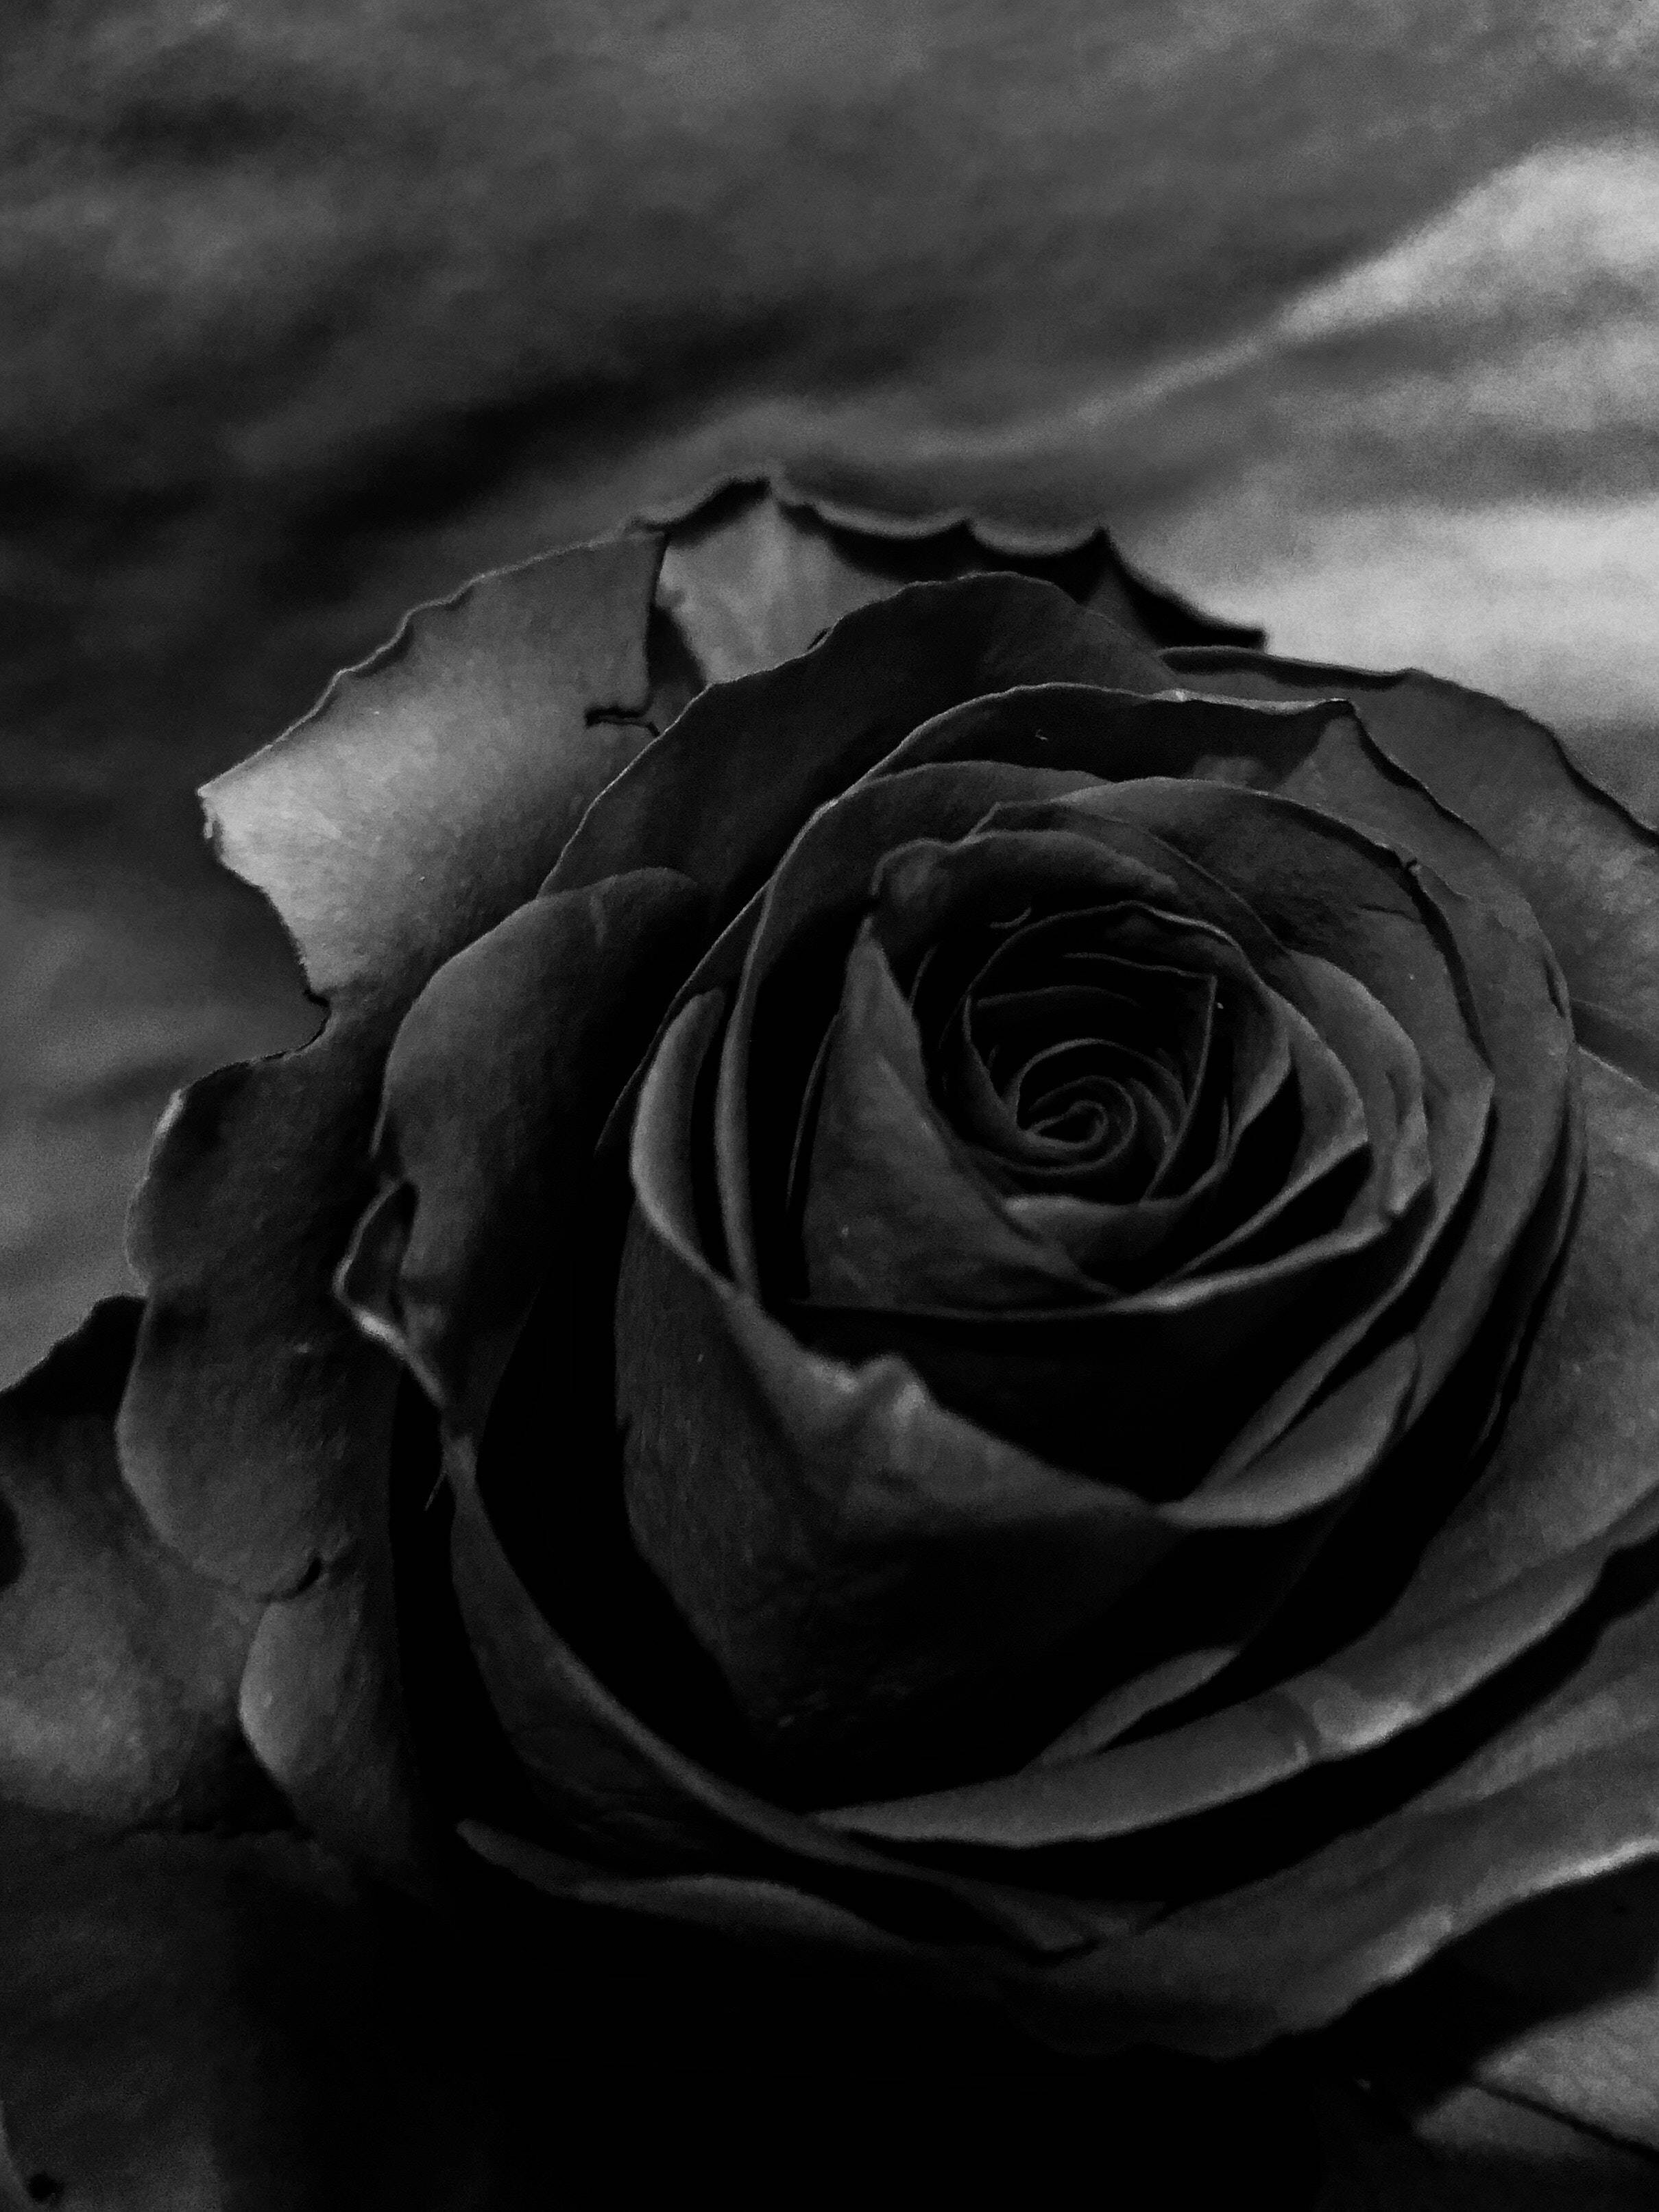 Mysterious Black Rose - The Ultimate Elegance for Your iPhone Wallpaper